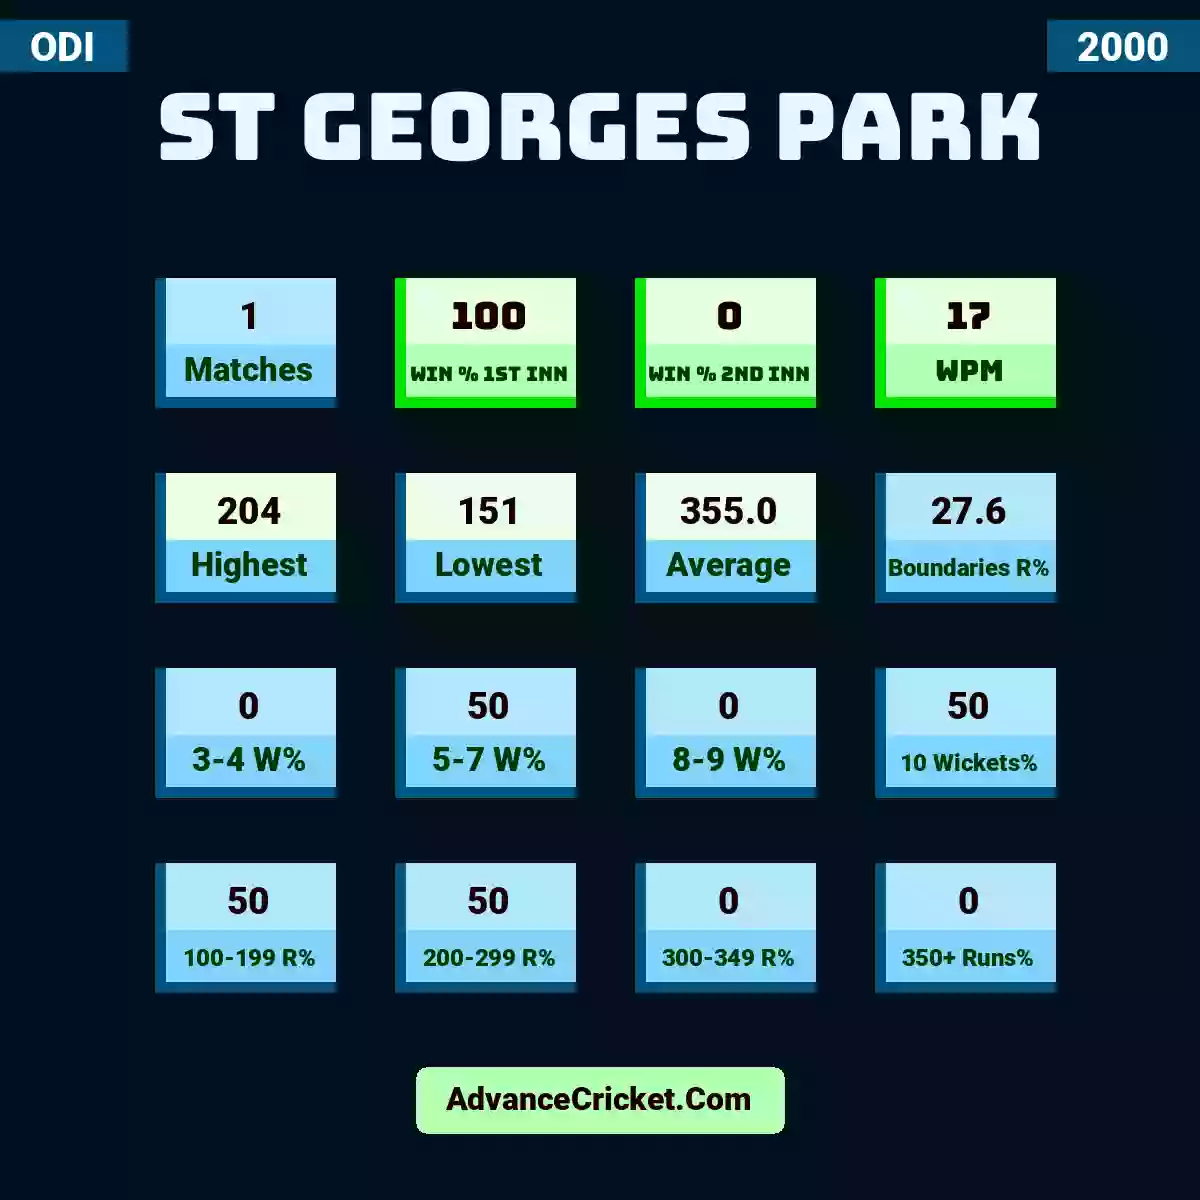 Image showing St Georges Park with Matches: 1, Win % 1st Inn: 100, Win % 2nd Inn: 0, WPM: 17, Highest: 204, Lowest: 151, Average: 355.0, Boundaries R%: 27.6, 3-4 W%: 0, 5-7 W%: 50, 8-9 W%: 0, 10 Wickets%: 50, 100-199 R%: 50, 200-299 R%: 50, 300-349 R%: 0, 350+ Runs%: 0.